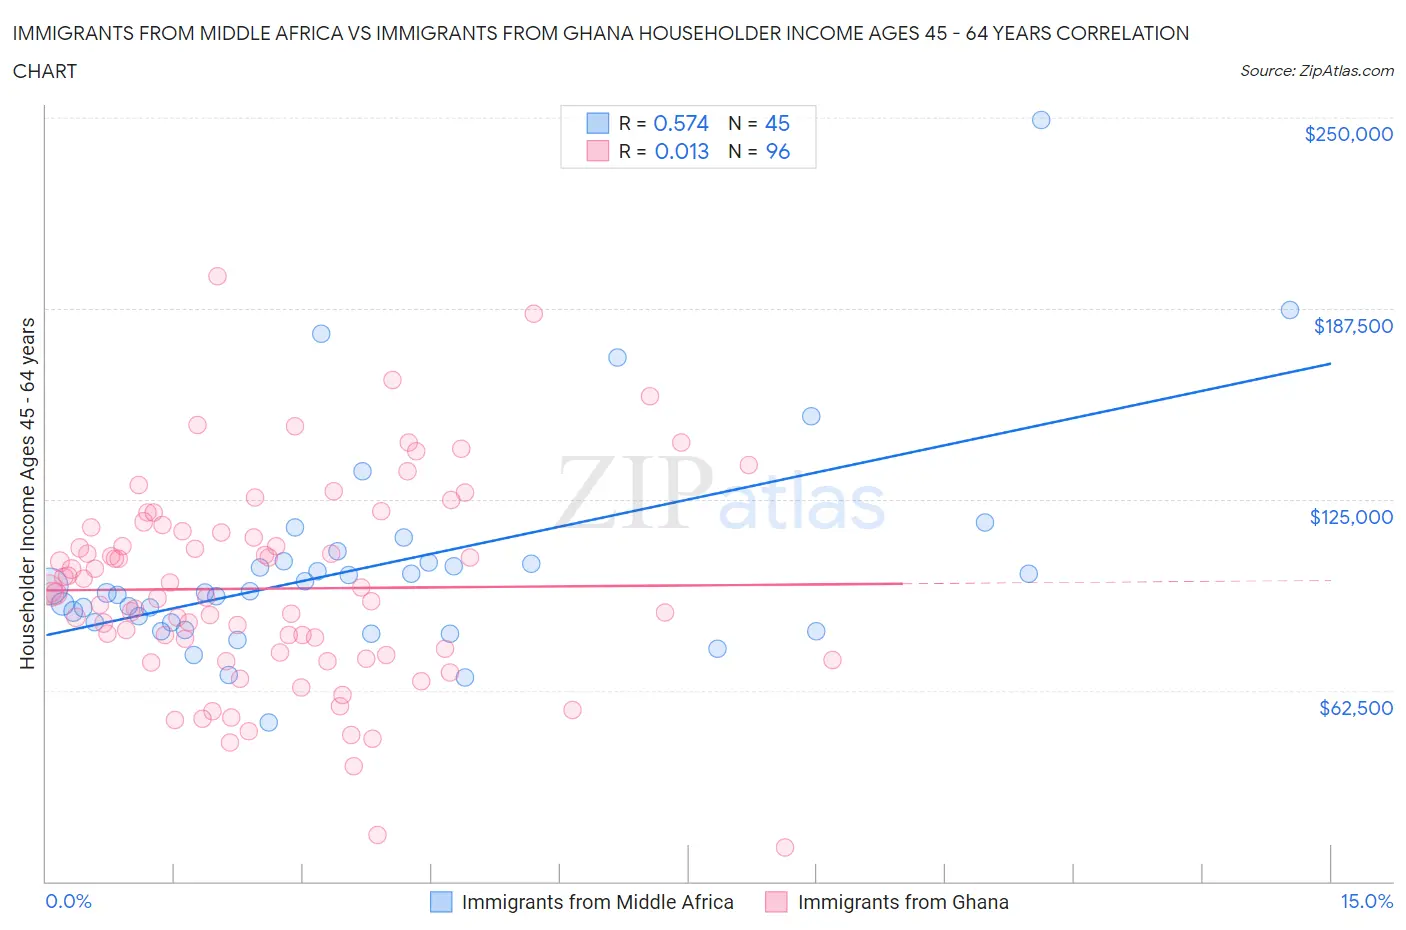 Immigrants from Middle Africa vs Immigrants from Ghana Householder Income Ages 45 - 64 years